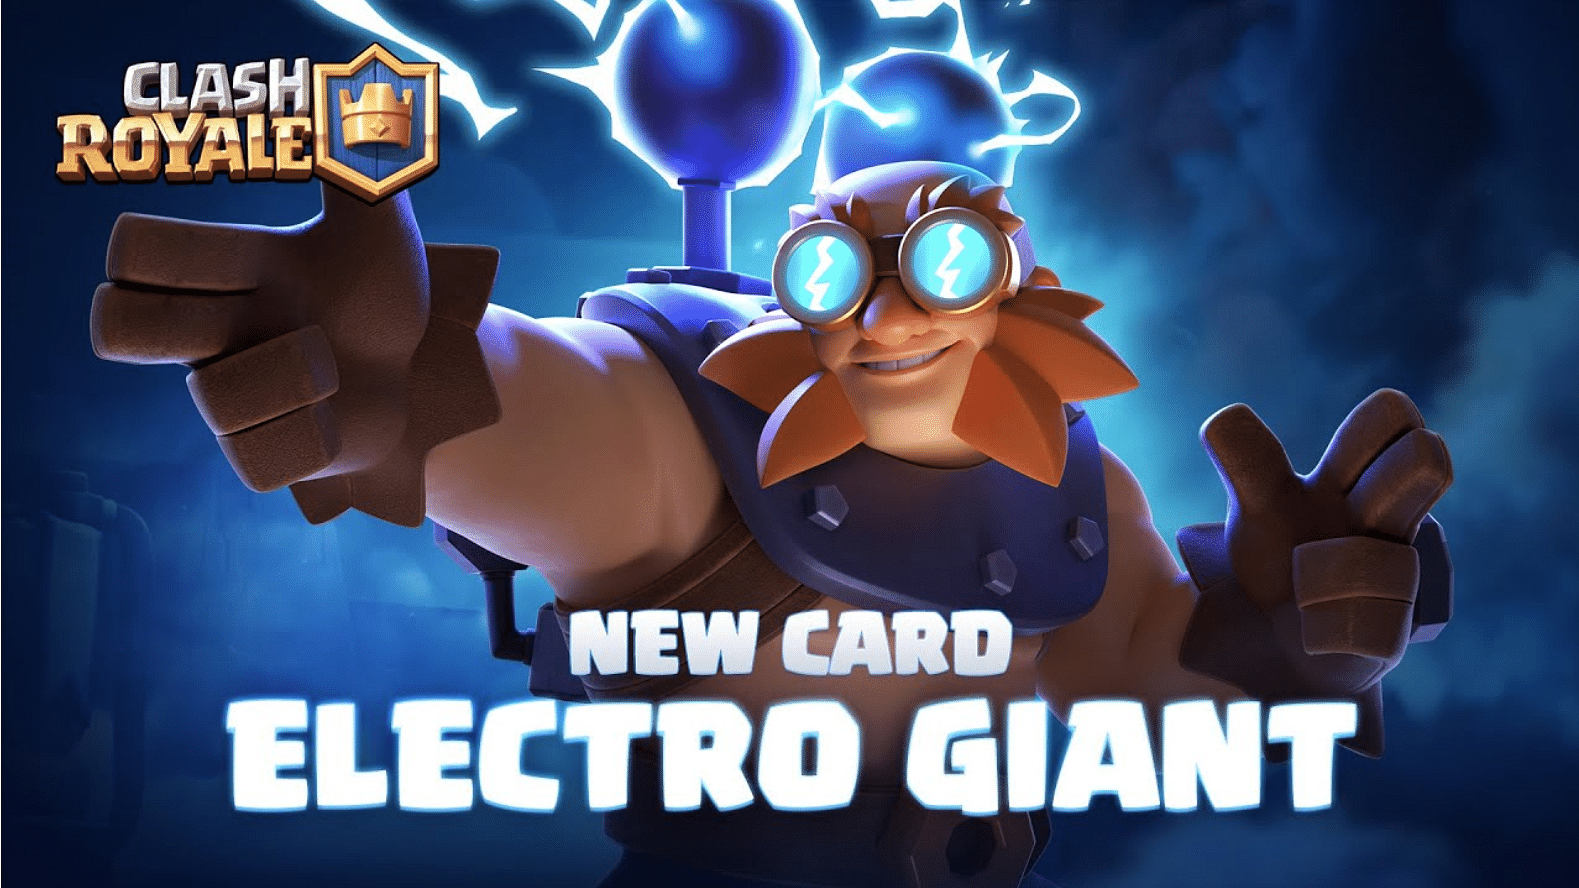 100th Card Electro Giant